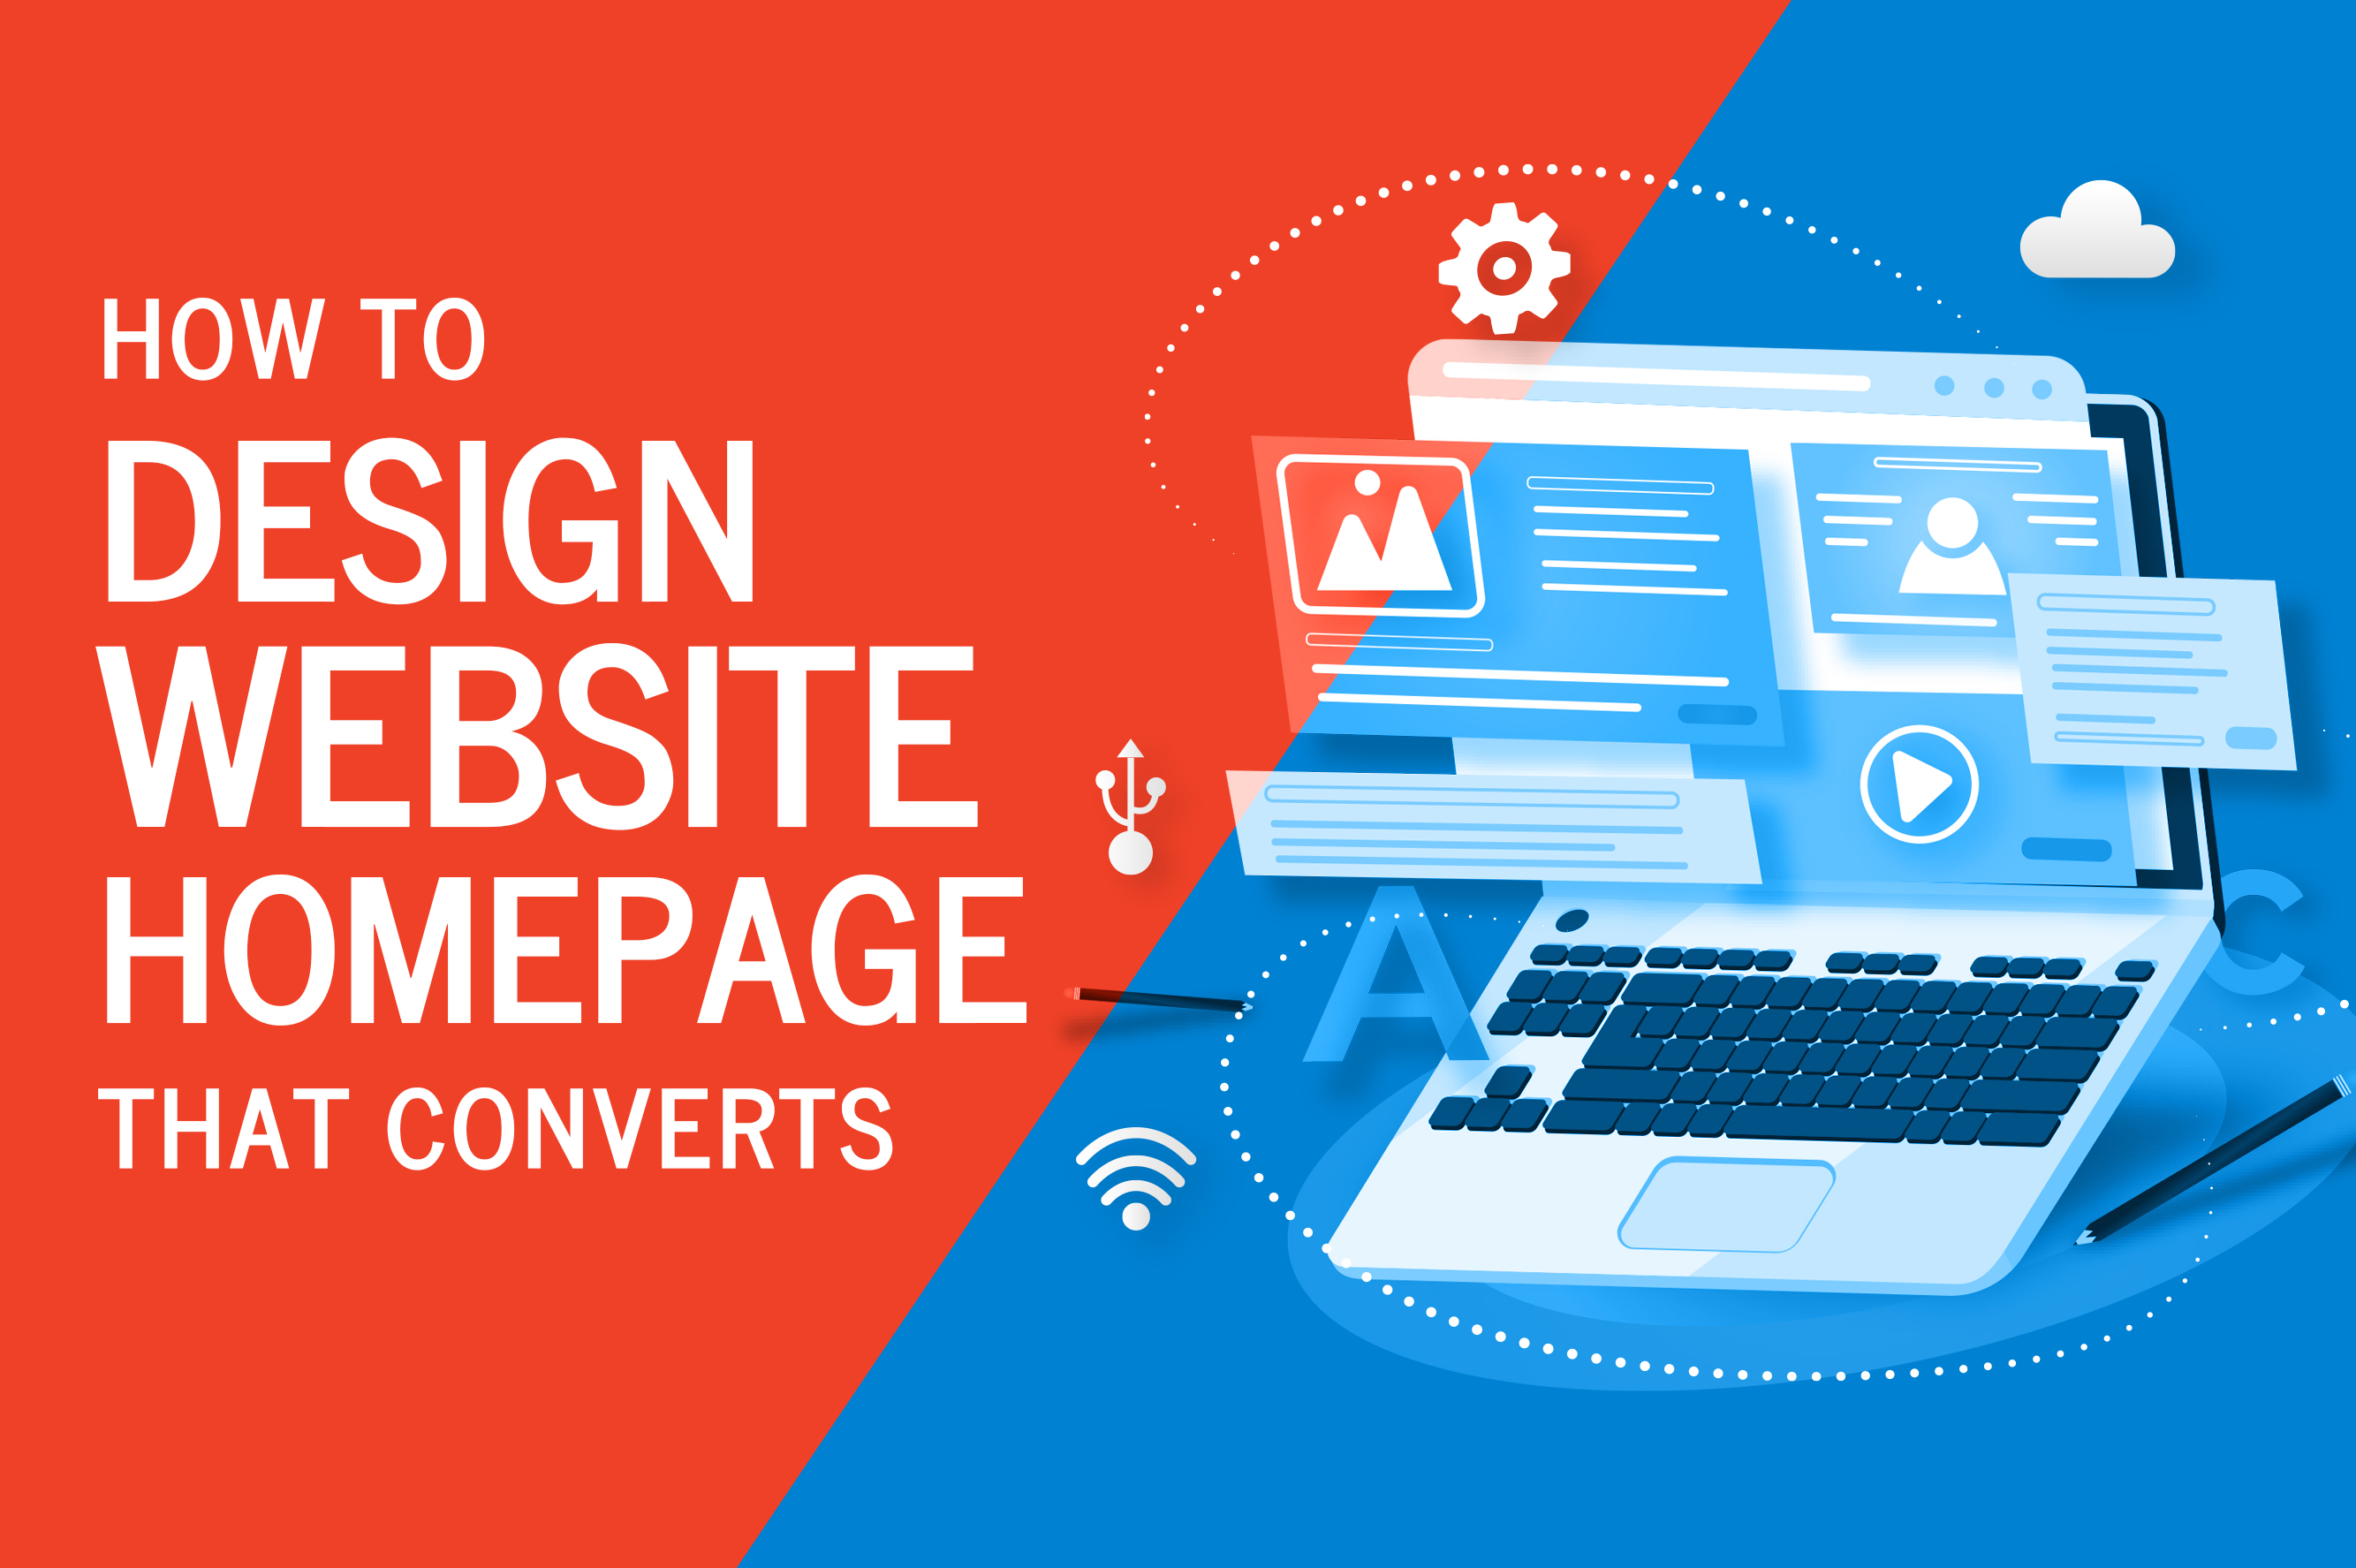 How to Design a Website Homepage that Converts